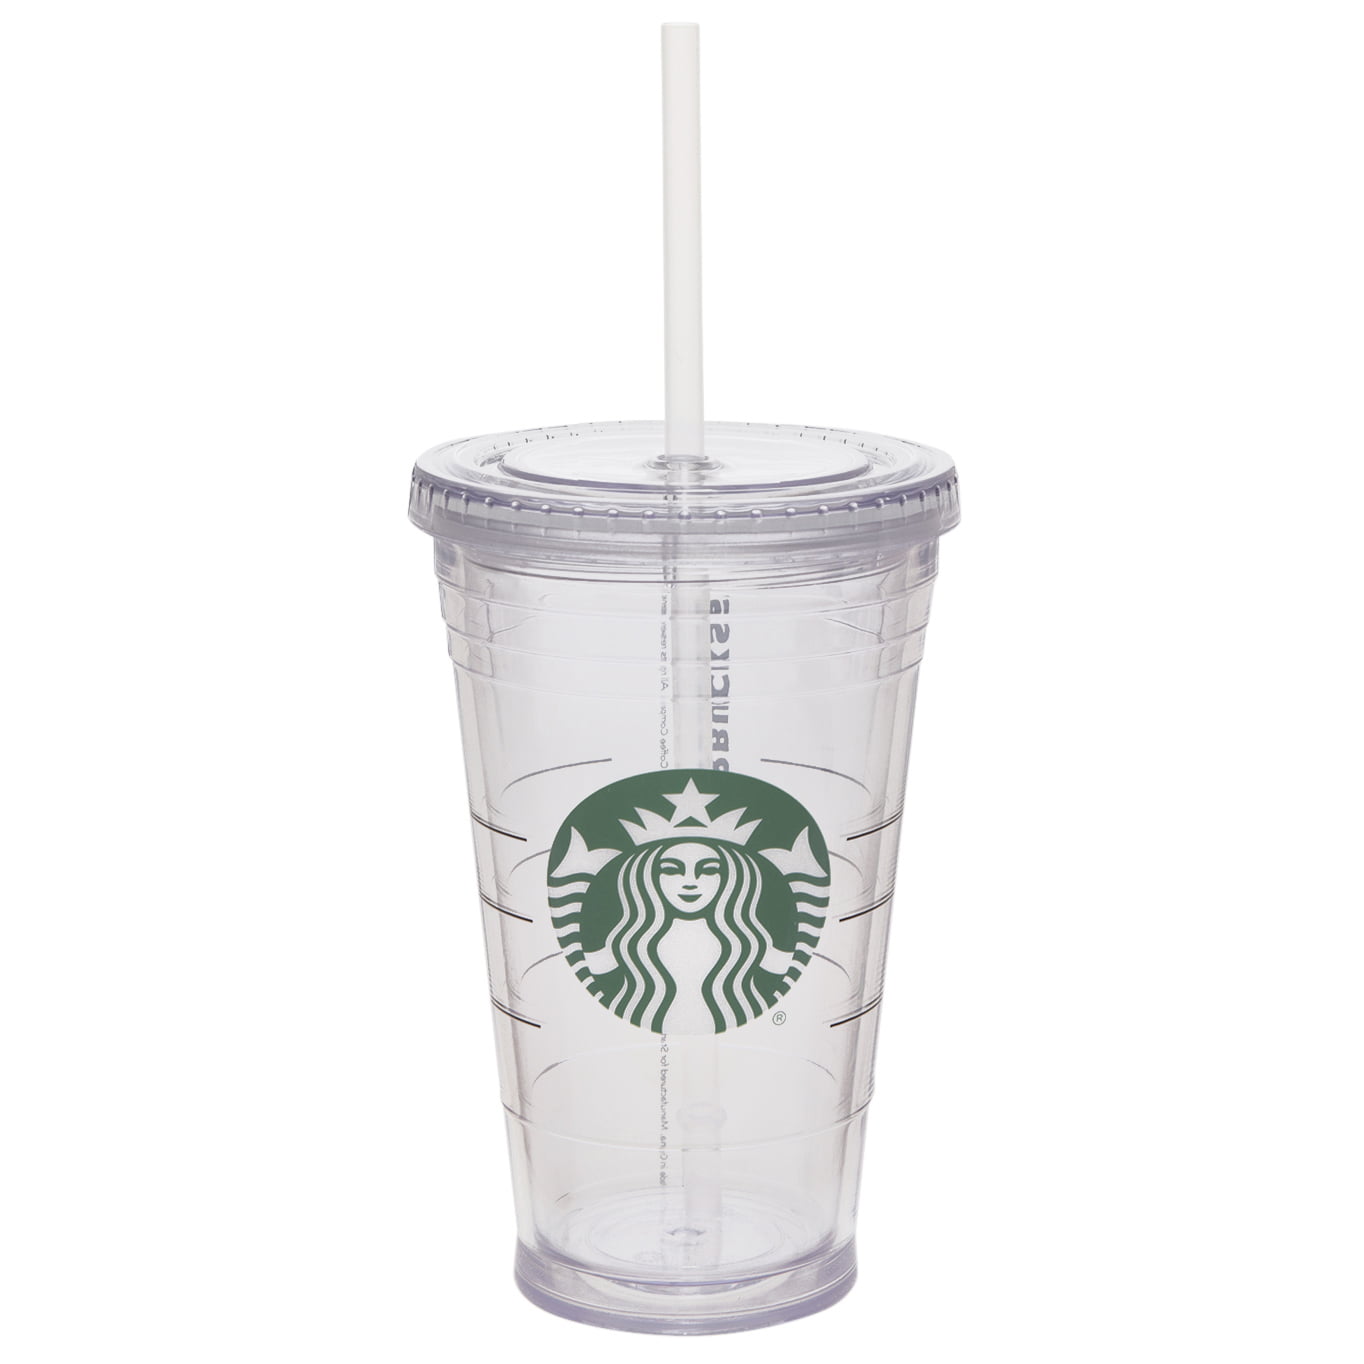 STARBUCKS Clear Plastic Cold Cup Coffee Lot Of 3 No Lids, No